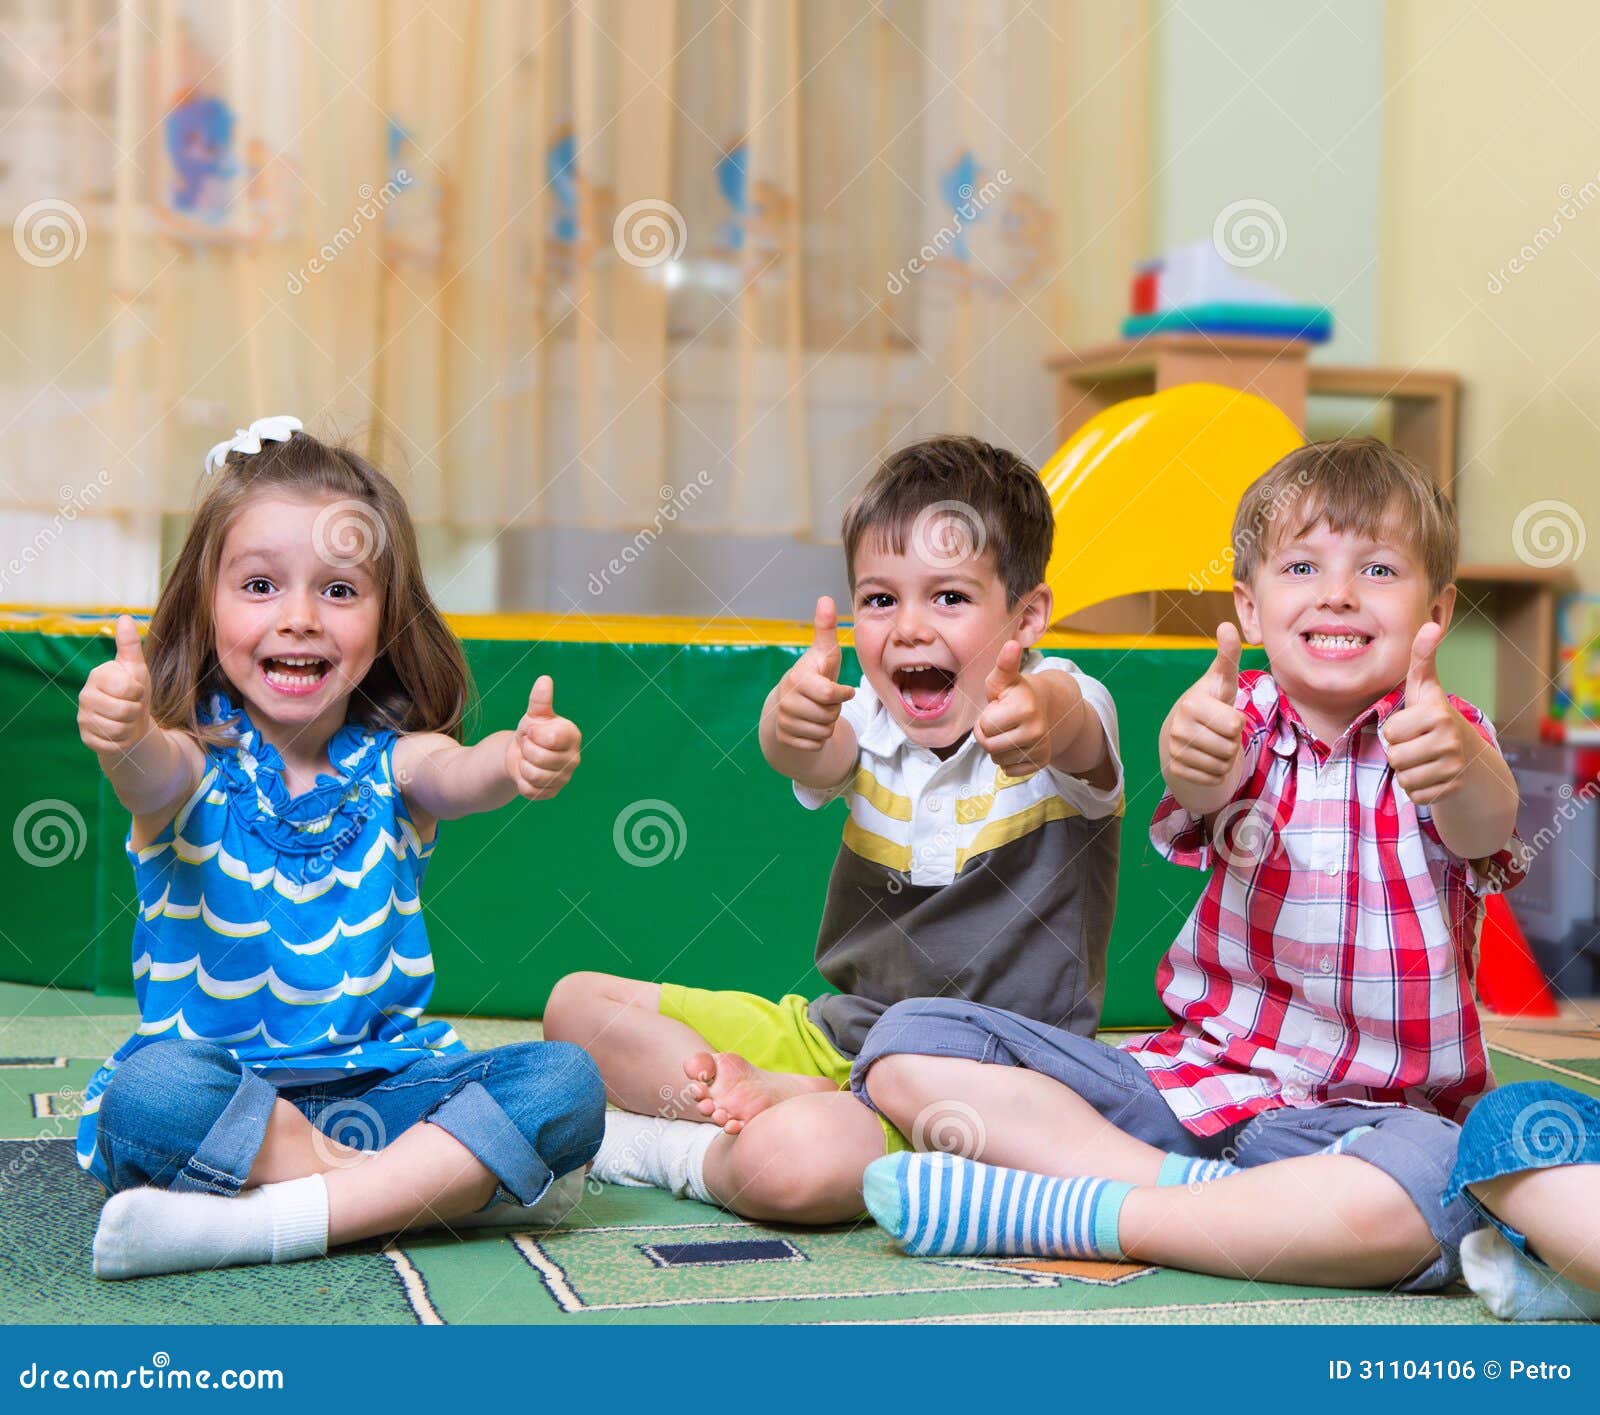 excited children holding thumbs up